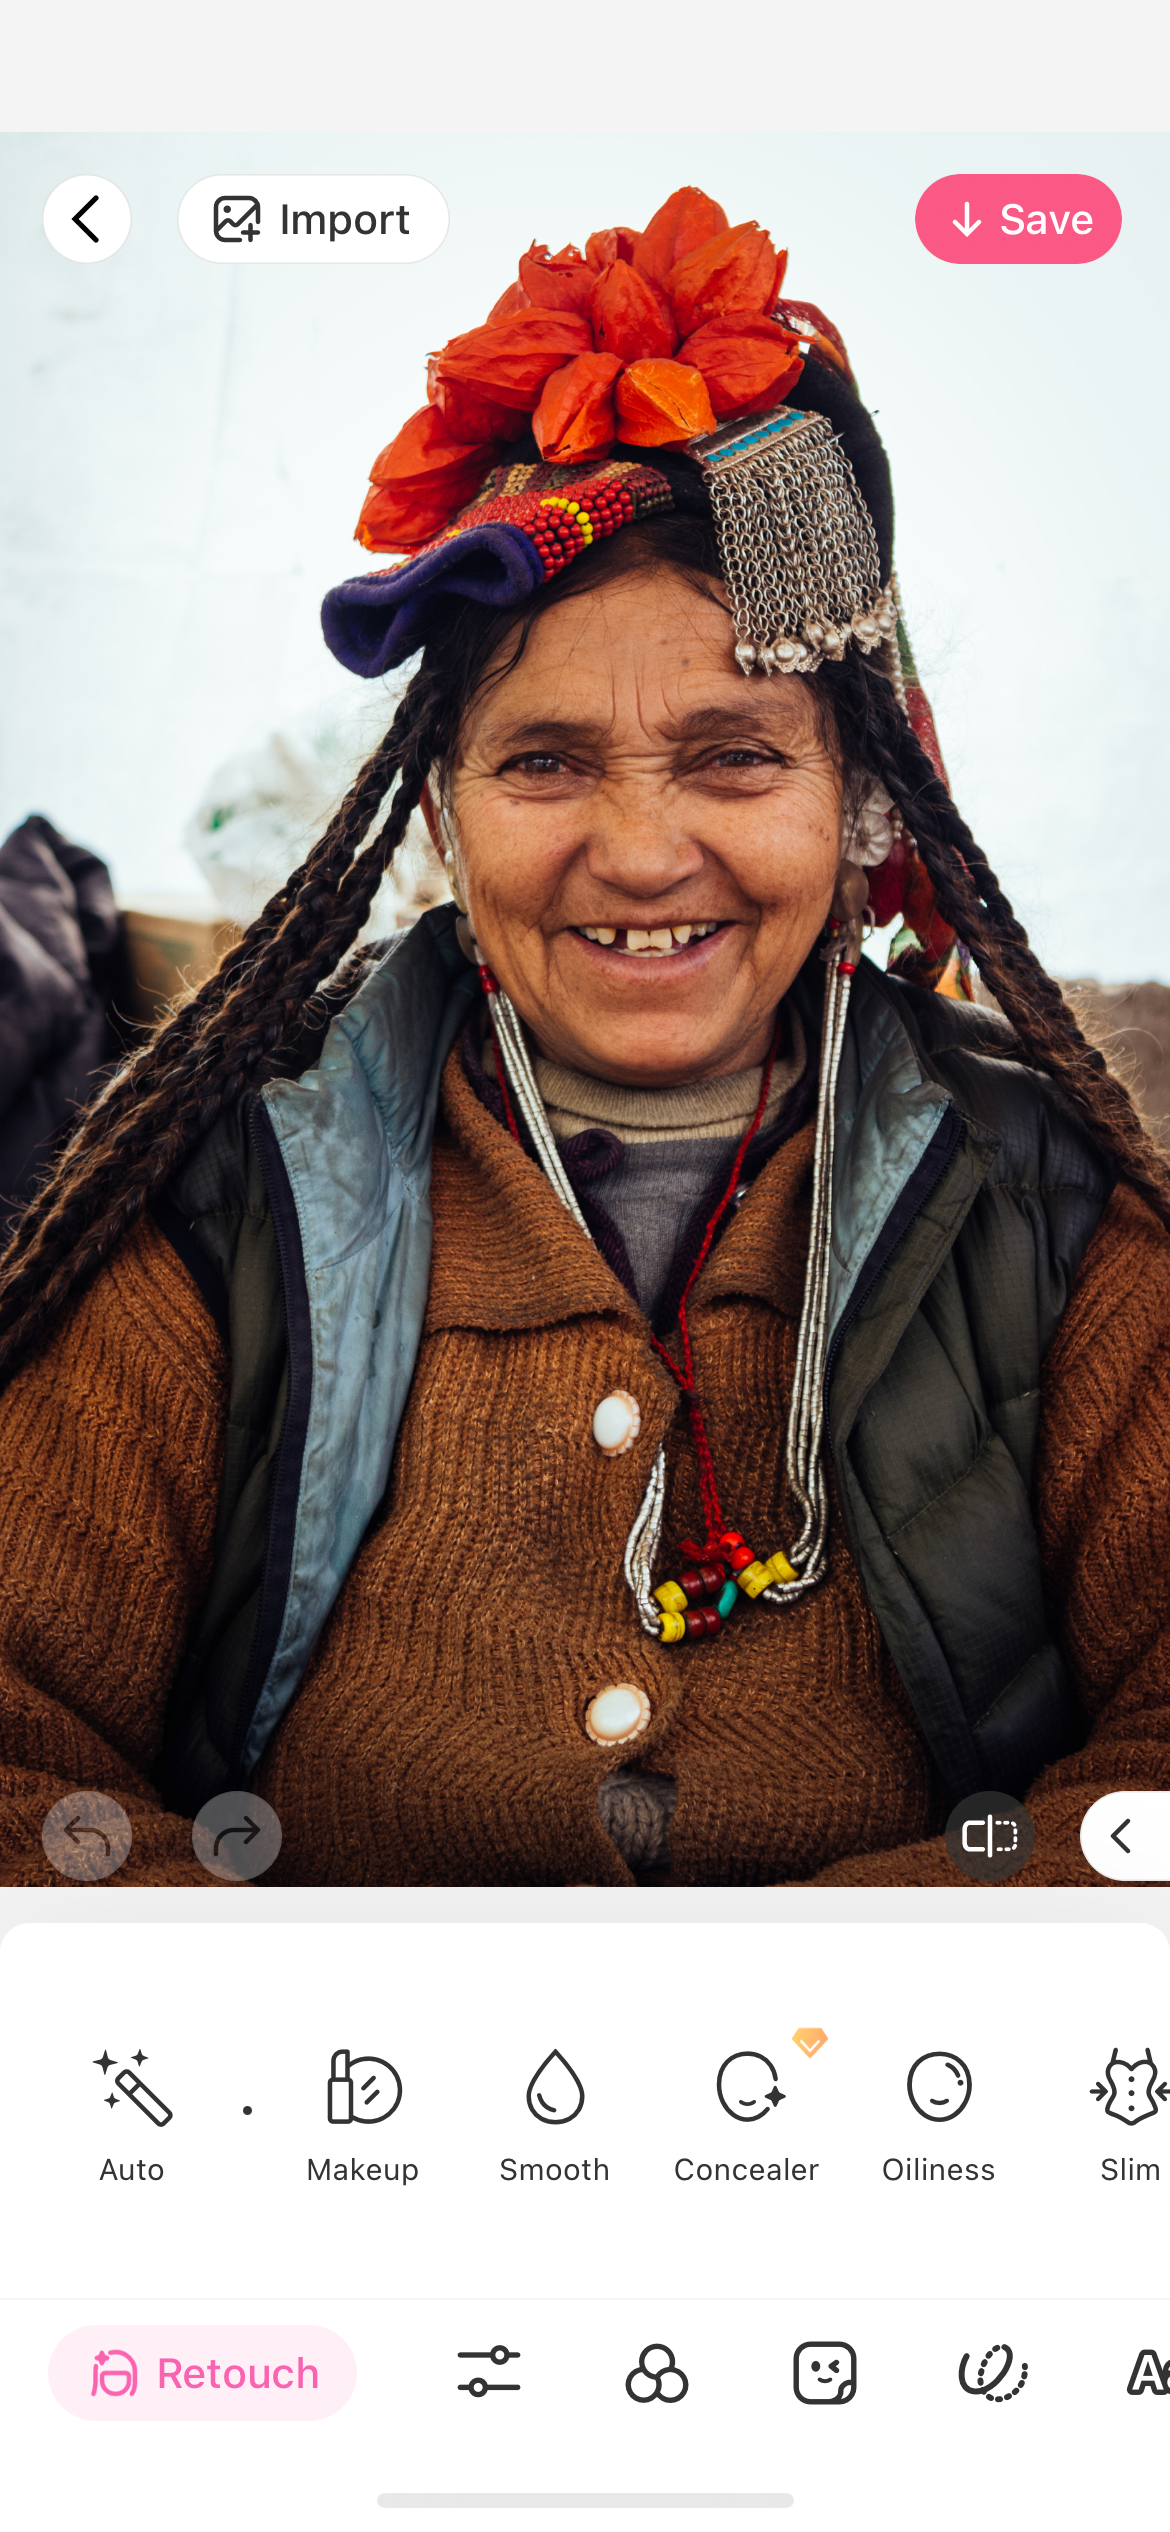 BeautyPlus screenshot showing an elderly woman with wrinkles, crooked teeth and a big smile